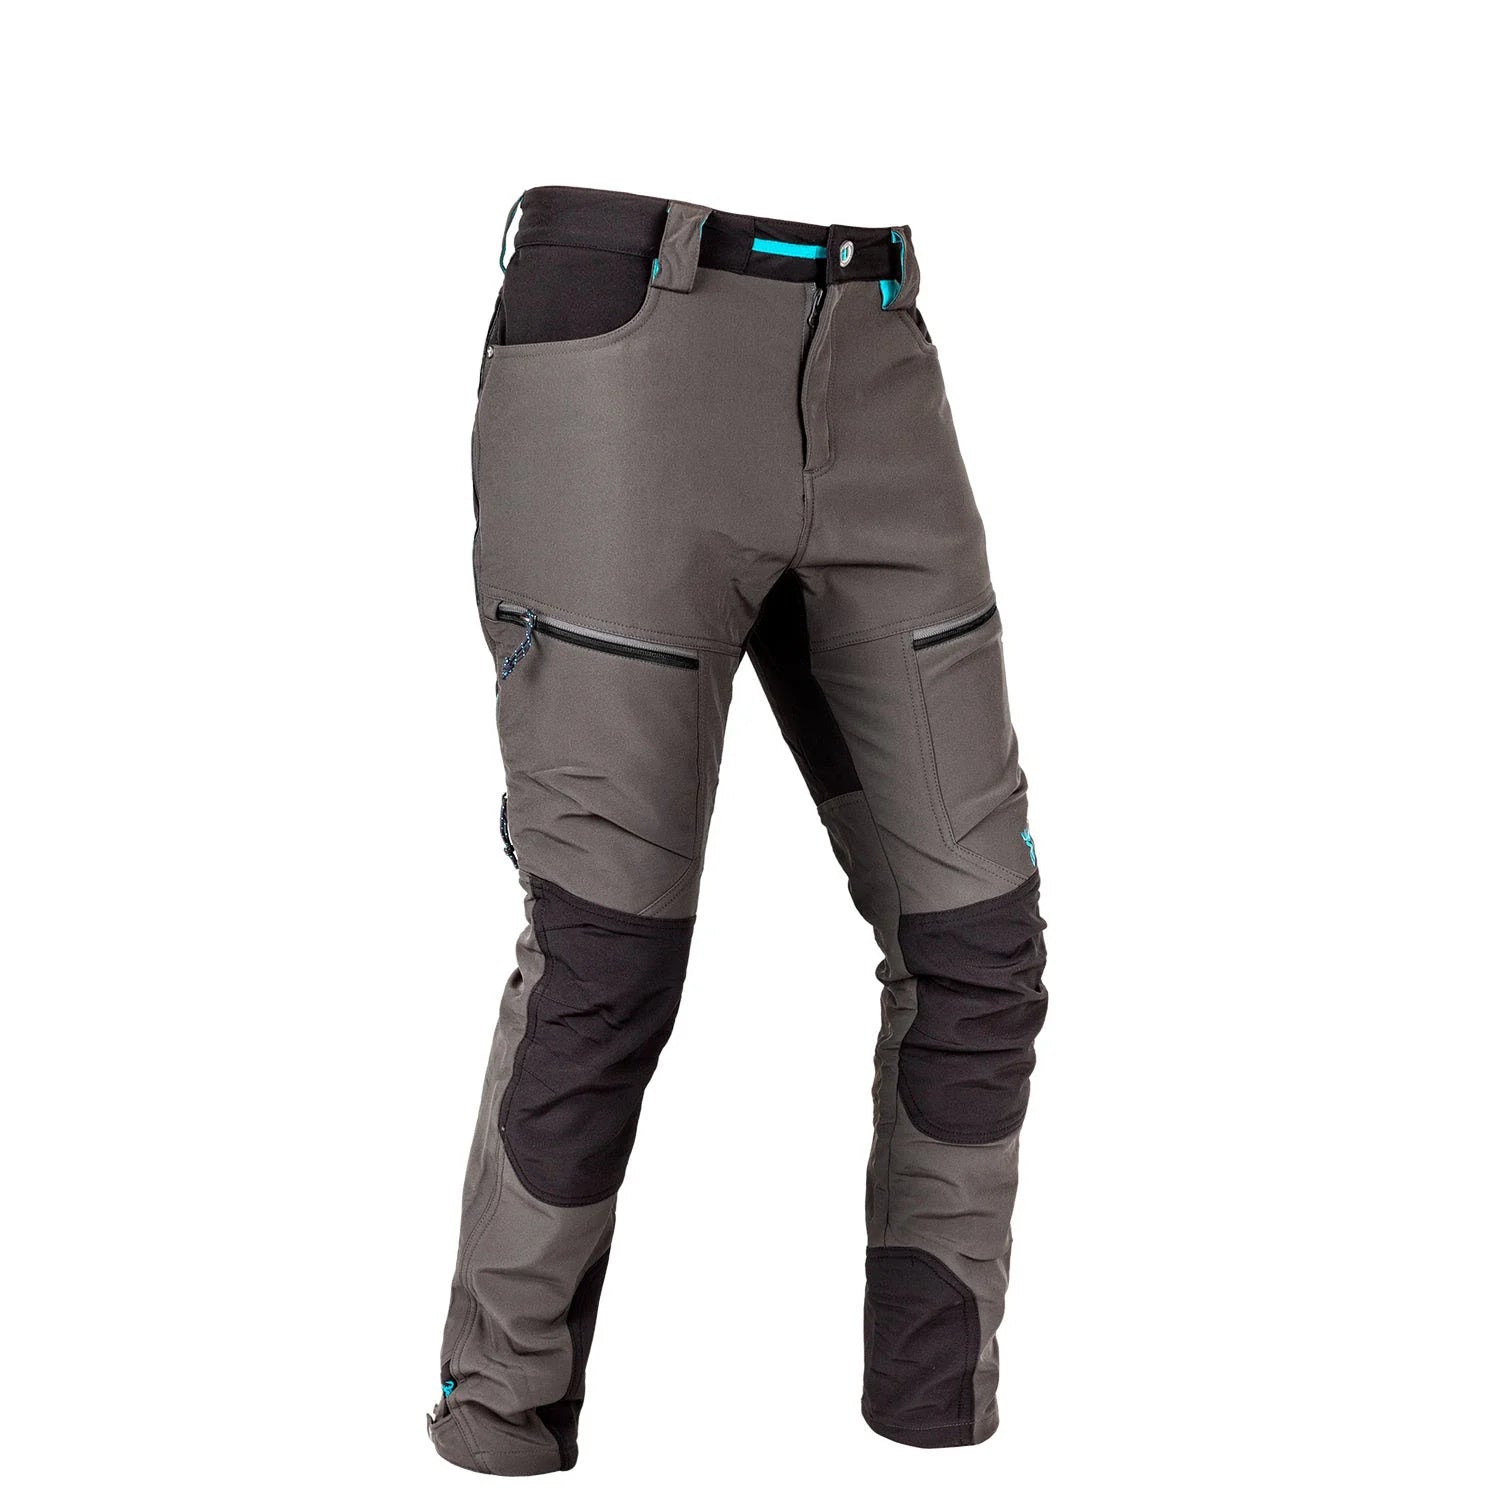 Hunters Element Womens Boulder Trouser - Grey/Black - 8 / GREY/BLACK - Mansfield Hunting & Fishing - Products to prepare for Corona Virus